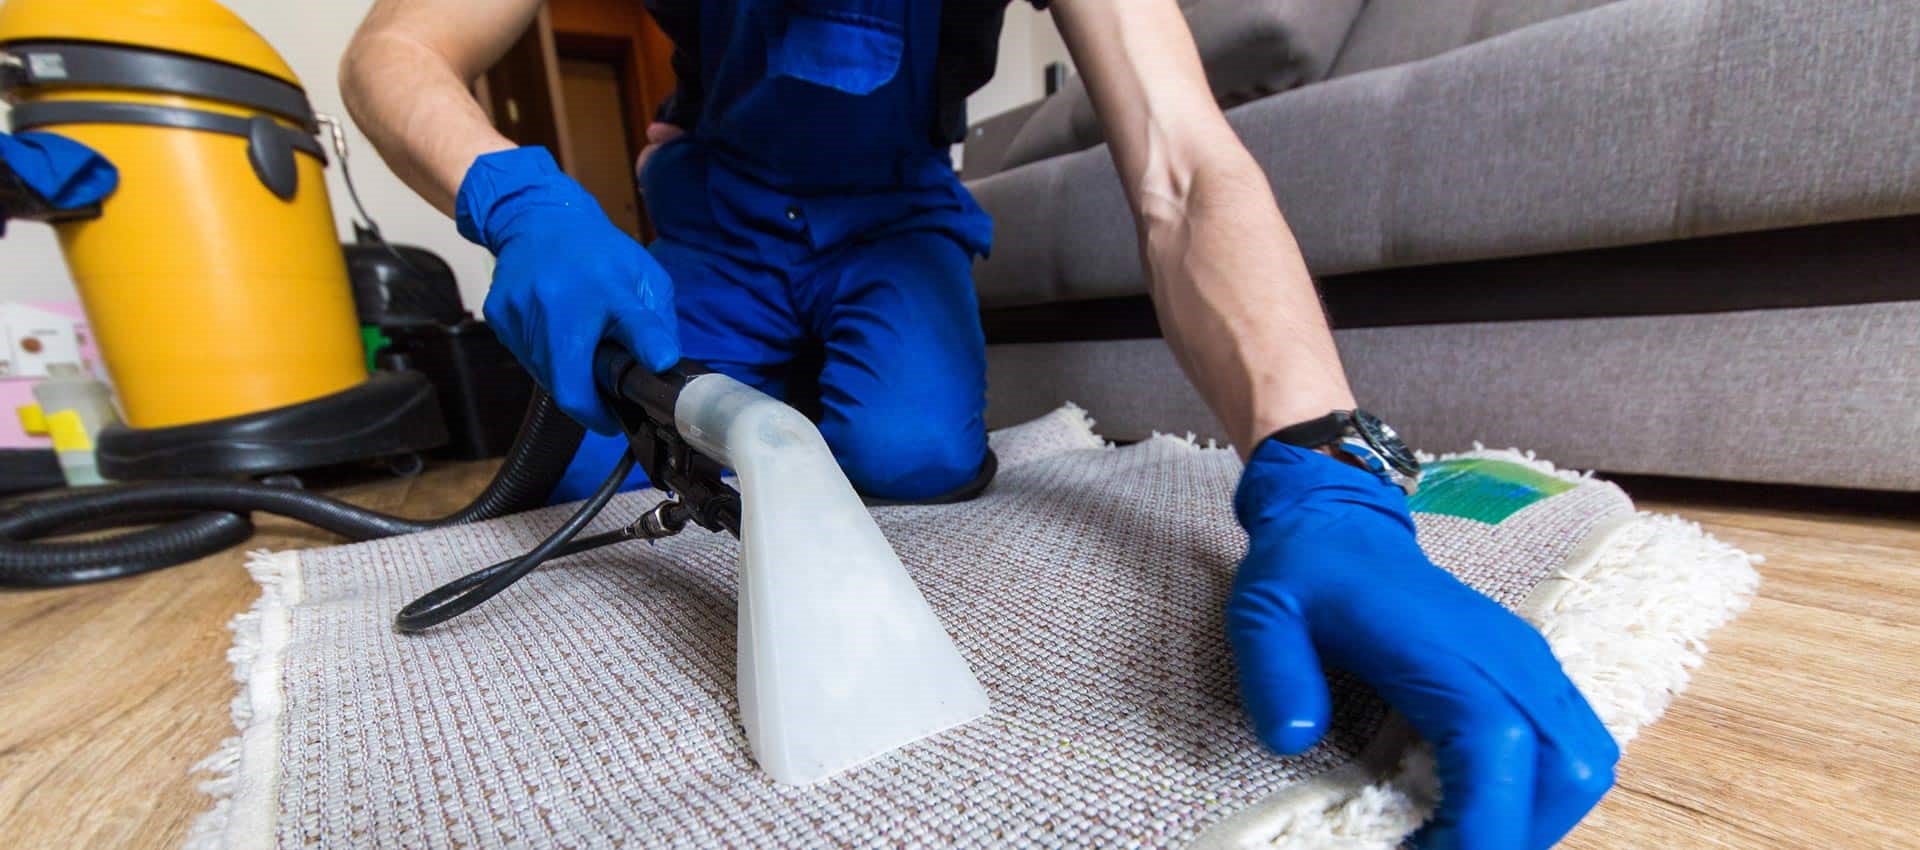 Why is end of lease cleaning services important in Australia